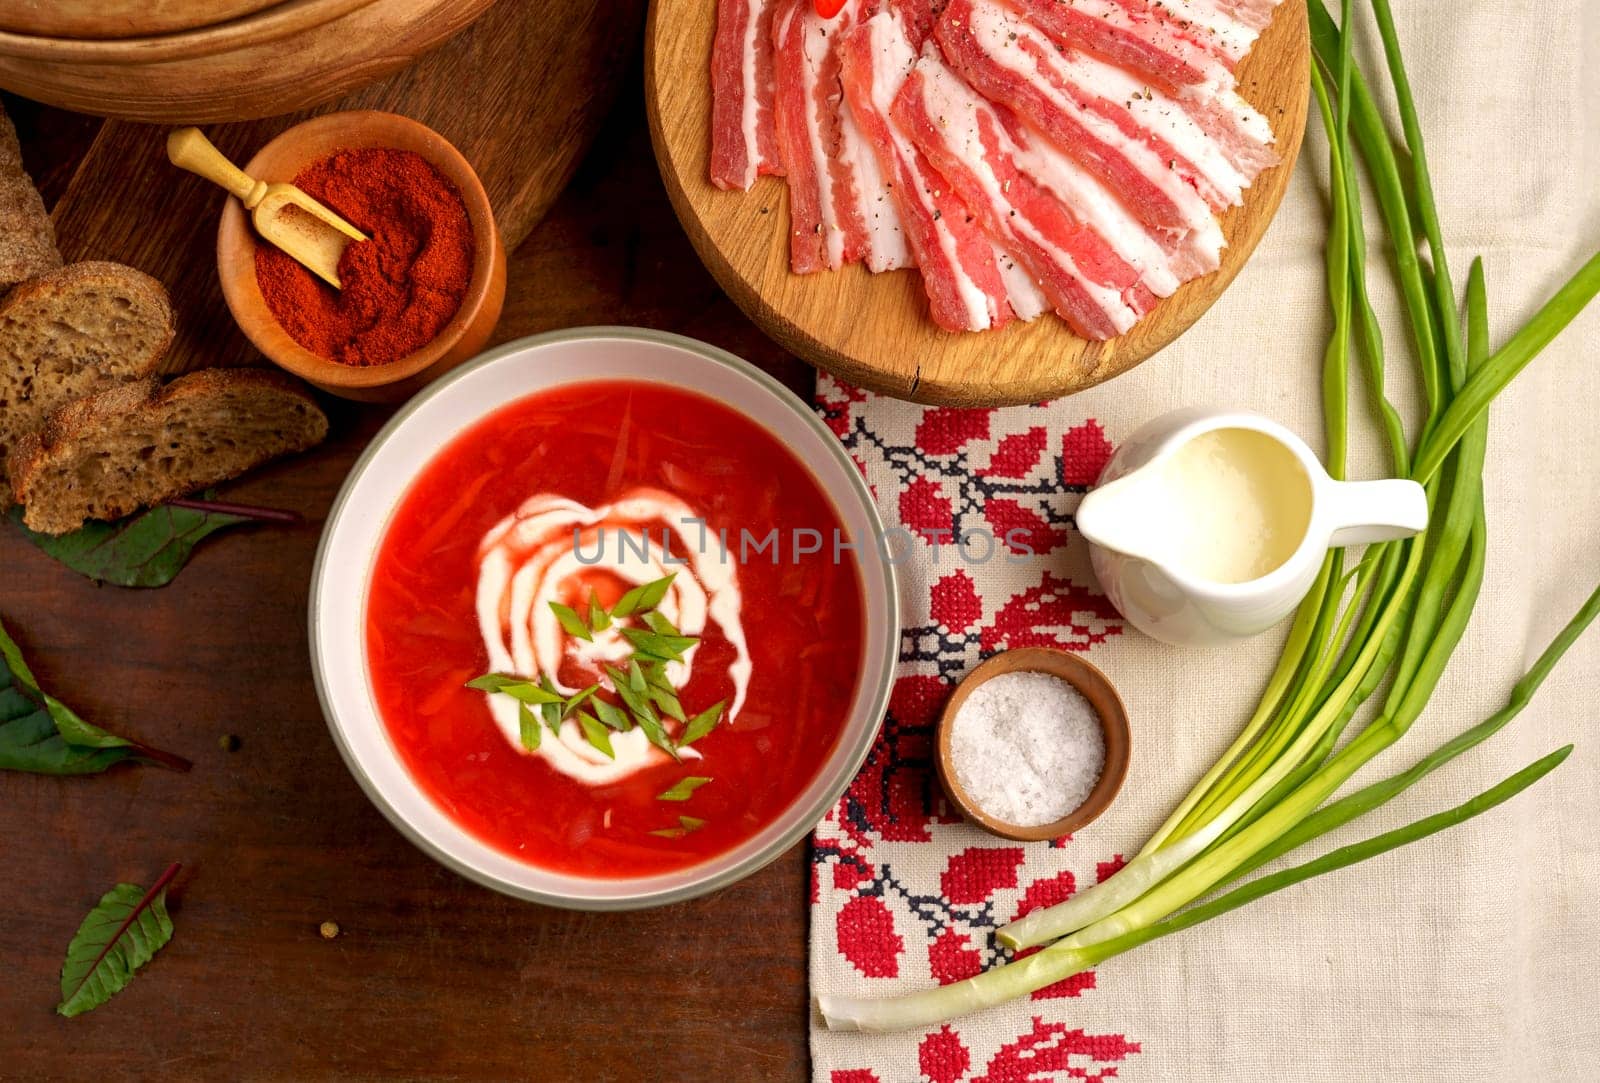 Traditional Ukrainian borsht, red vegetable soup or borscht with smetana on wooden background. Slavic dish with cabbage, beets, tomatoes Top view of a wooden tray on a black background on which lies Ukrainian food with spices Traditional Ukrainian towel along with garlic, bread and salt.